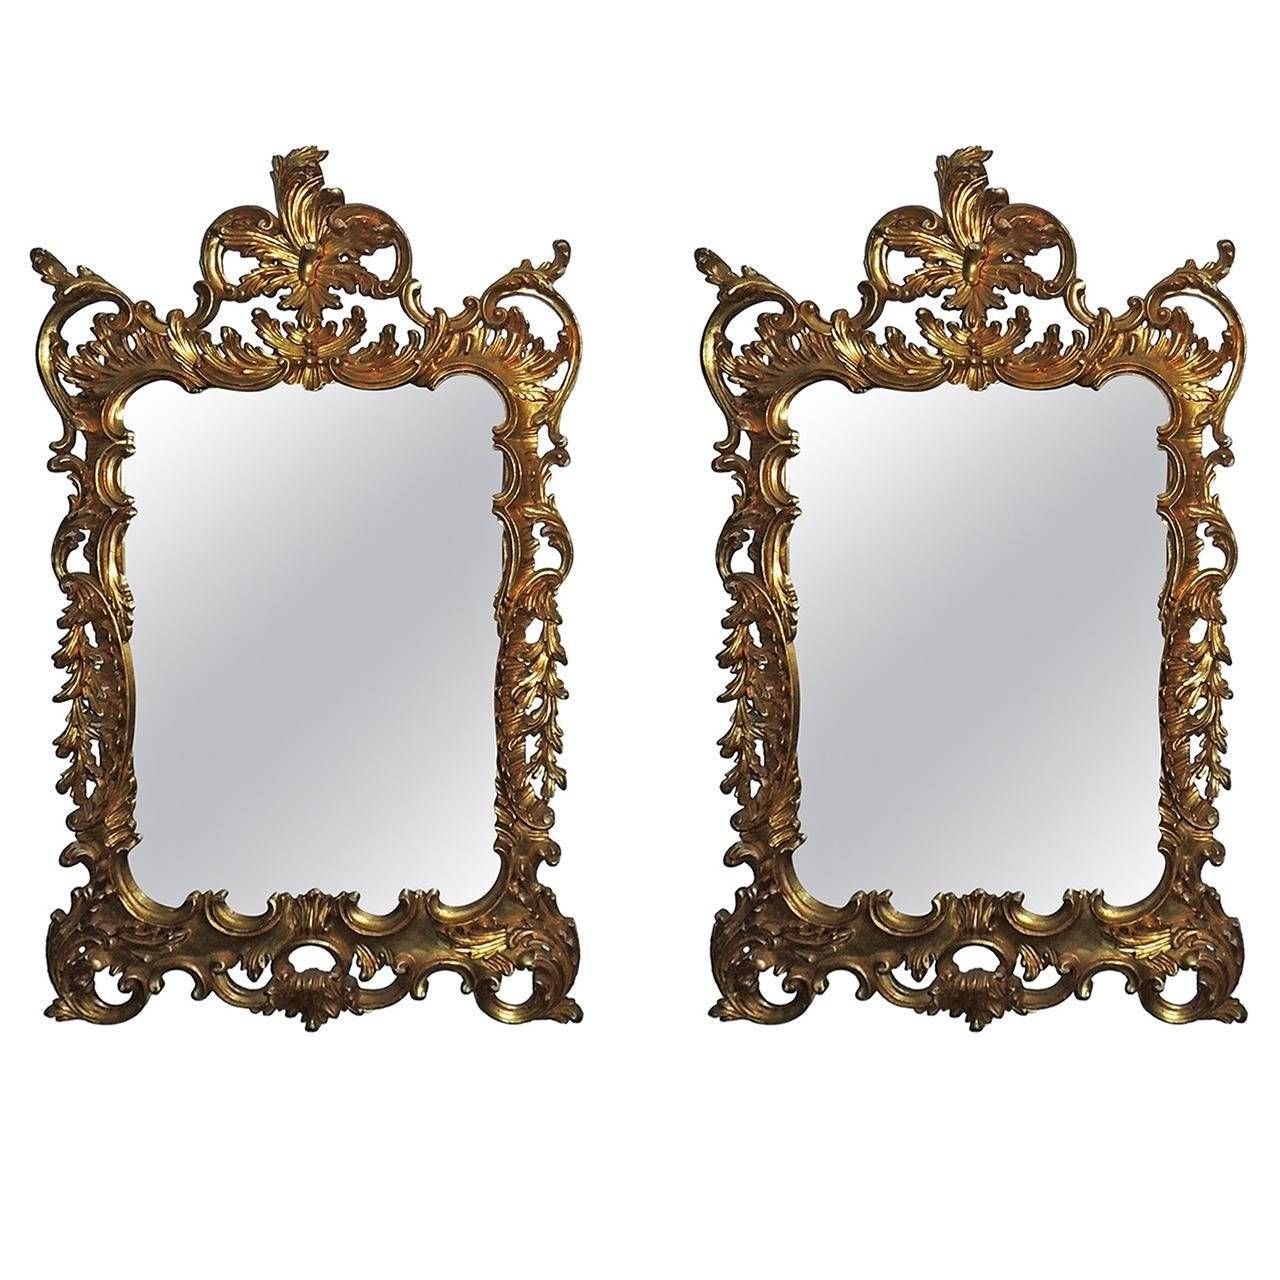 Wonderful Pair Of Italian Gilt Carved Wood Rococo Mirrors With Throughout Rococo Wall Mirrors (View 10 of 15)